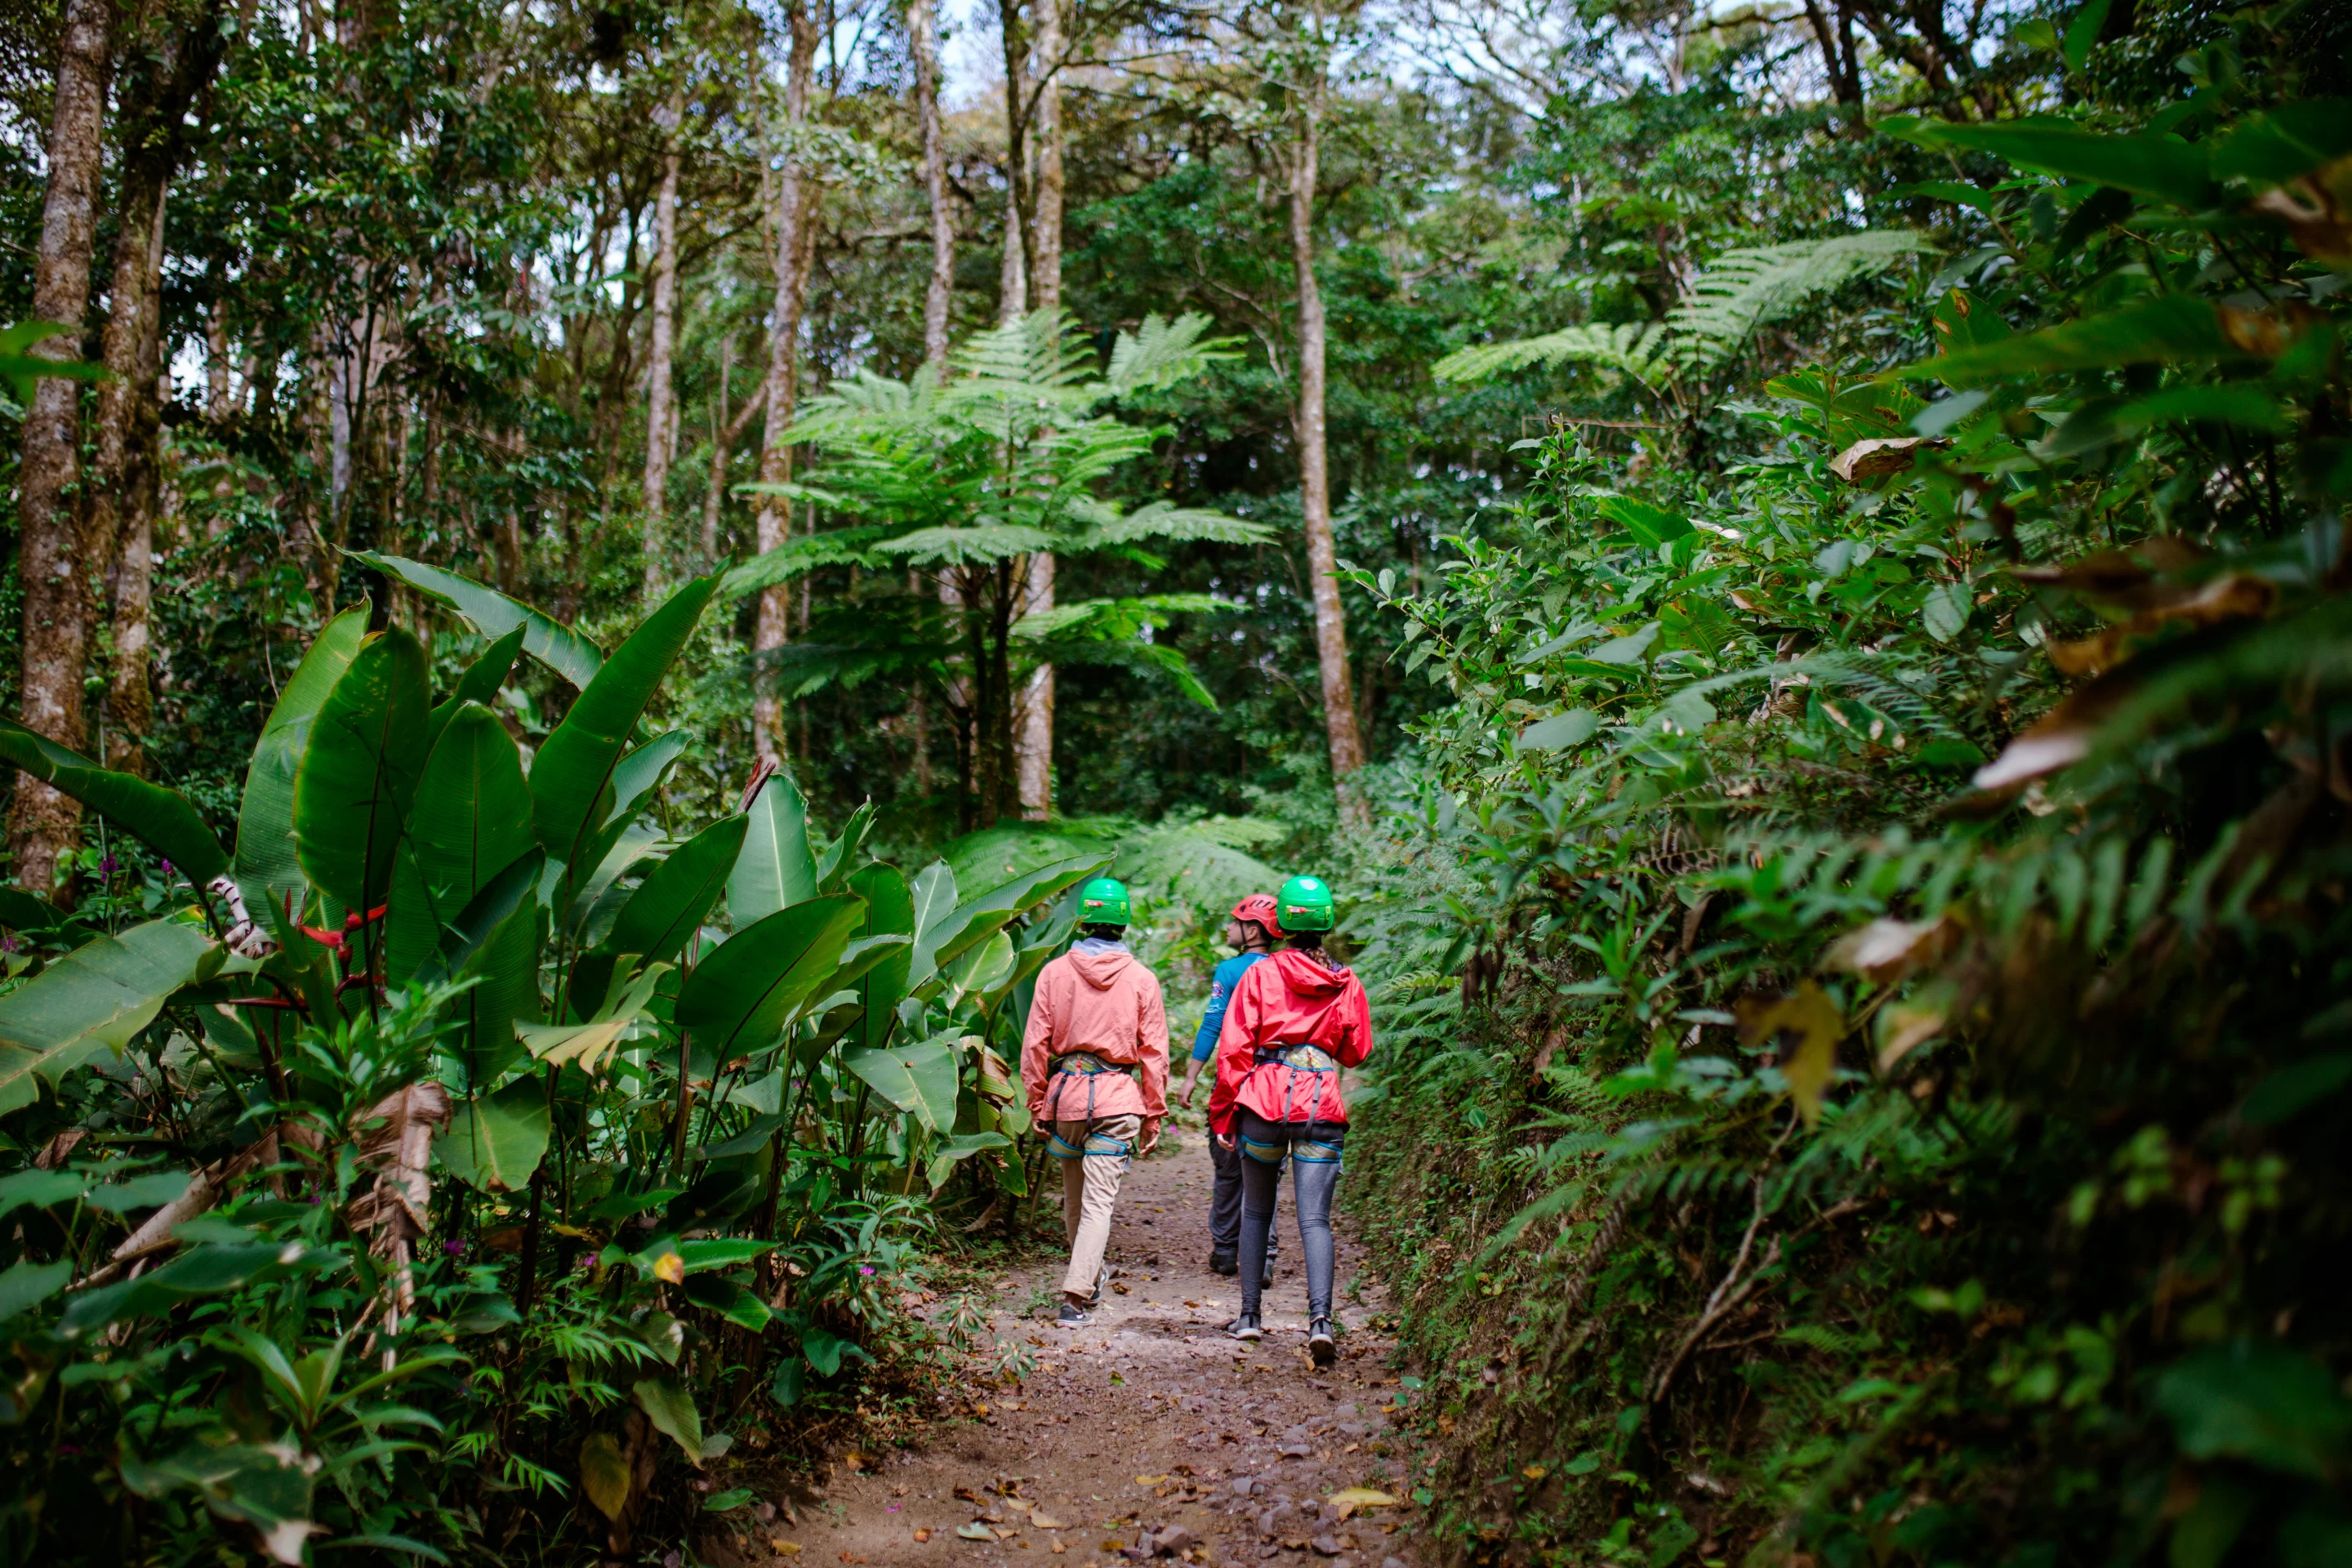 The Monteverde Cloud Forest Biological Reserve plays a significant role in preserving Costa Rica's natural beauty.